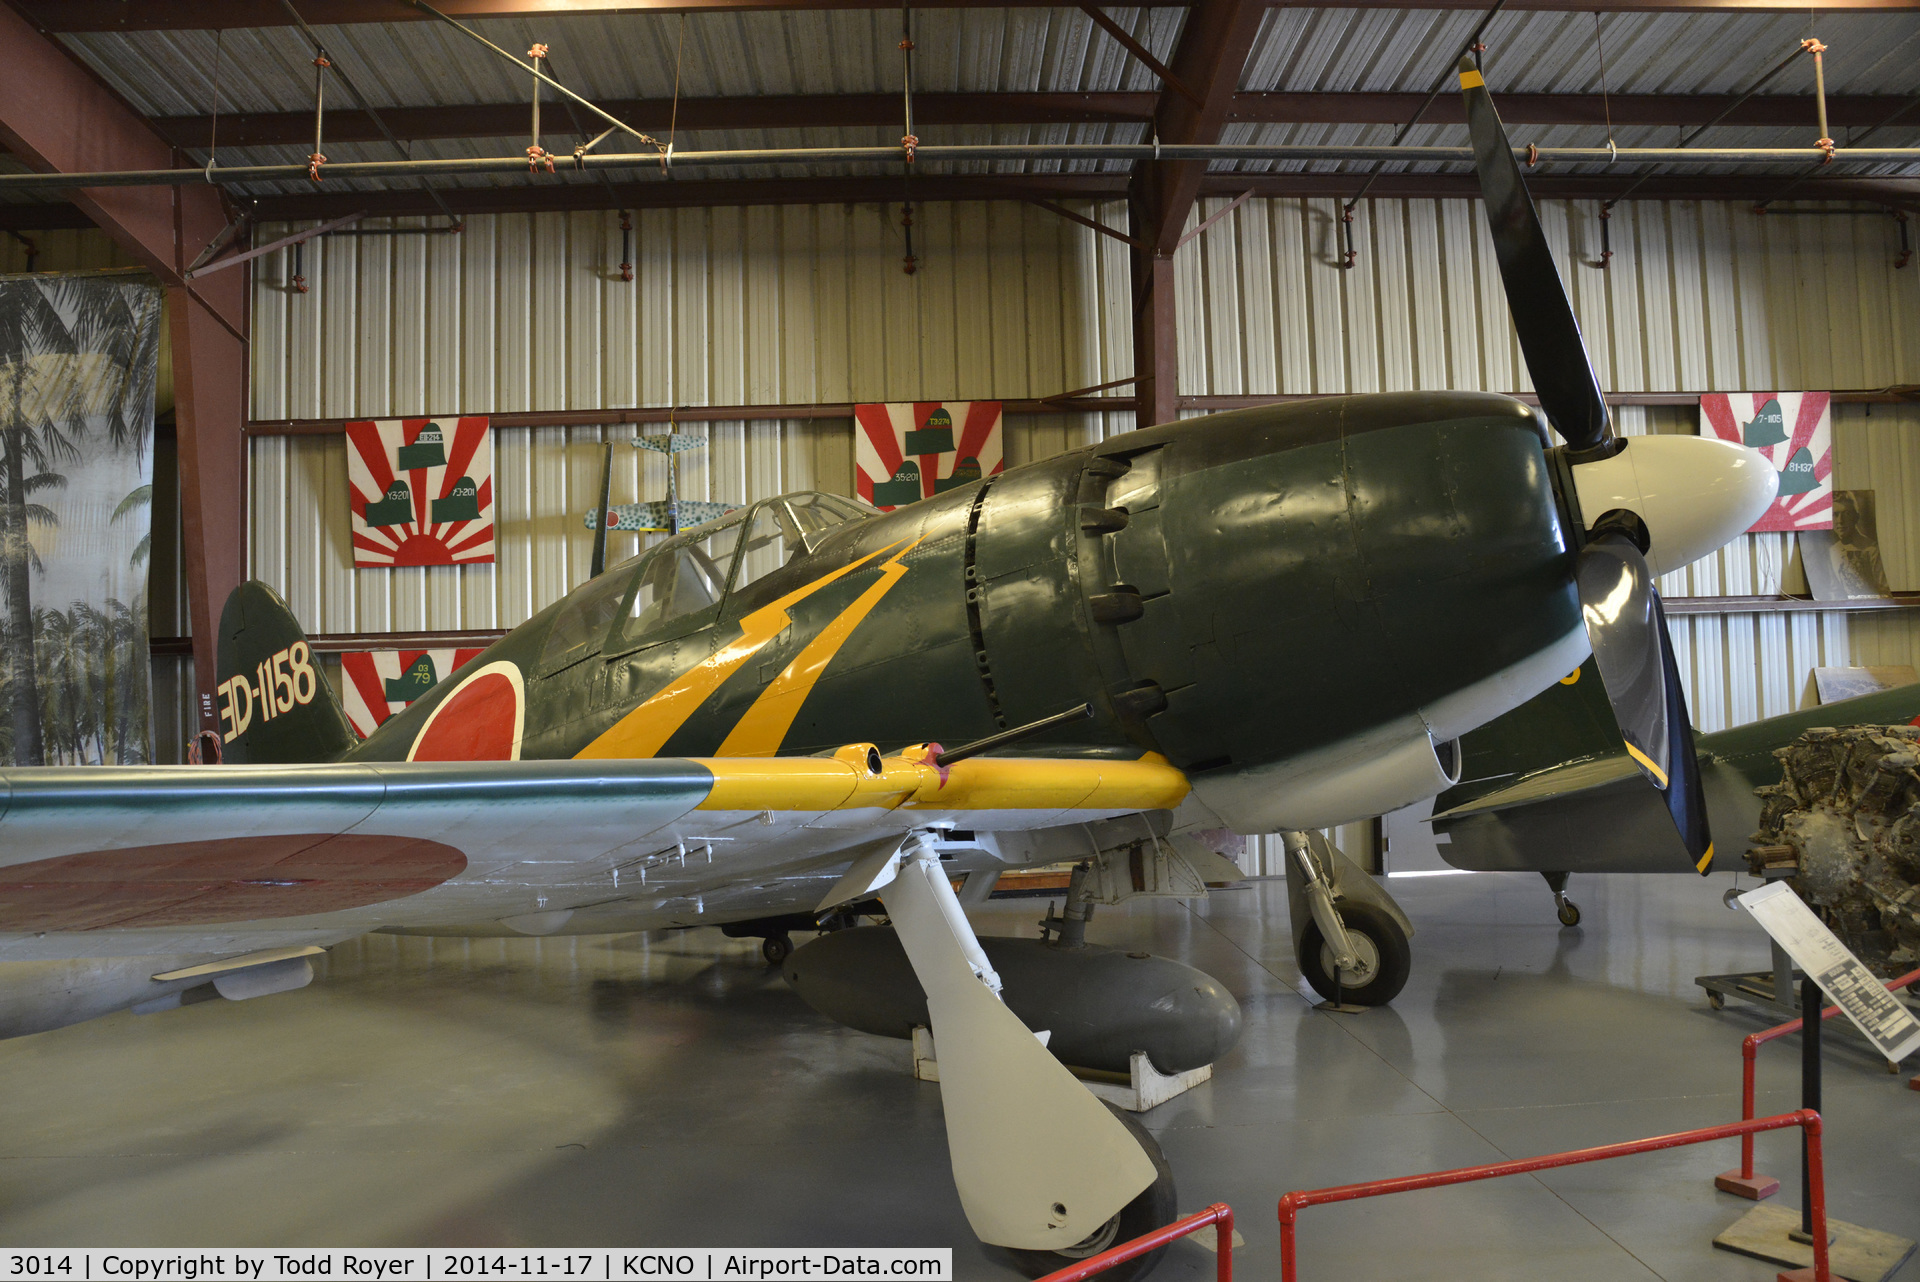 3014, 1943 Mitsubishi J2M3 Raiden D4 C/N 0000, On Display at the Planes of Fame Chino location